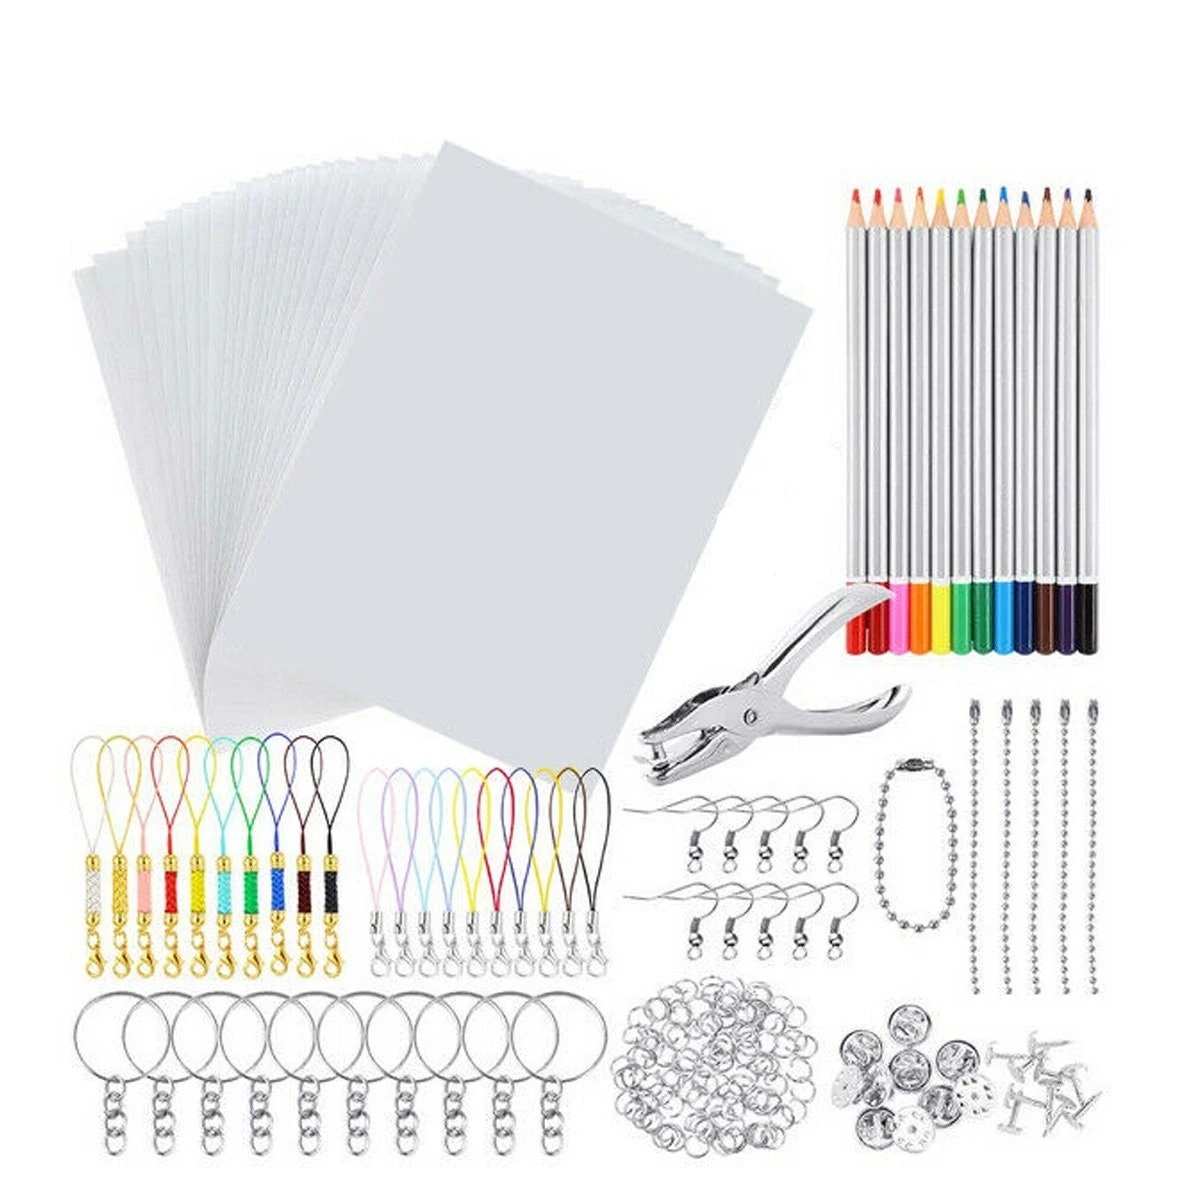 OFNMY 125 Pieces Heat Shrink Plastic Sheet Kit with 25 PCS Shrinky Art  Paper and 100 PCS Keychains for Kids Creative Craft Marking, Homemade  Shrinky